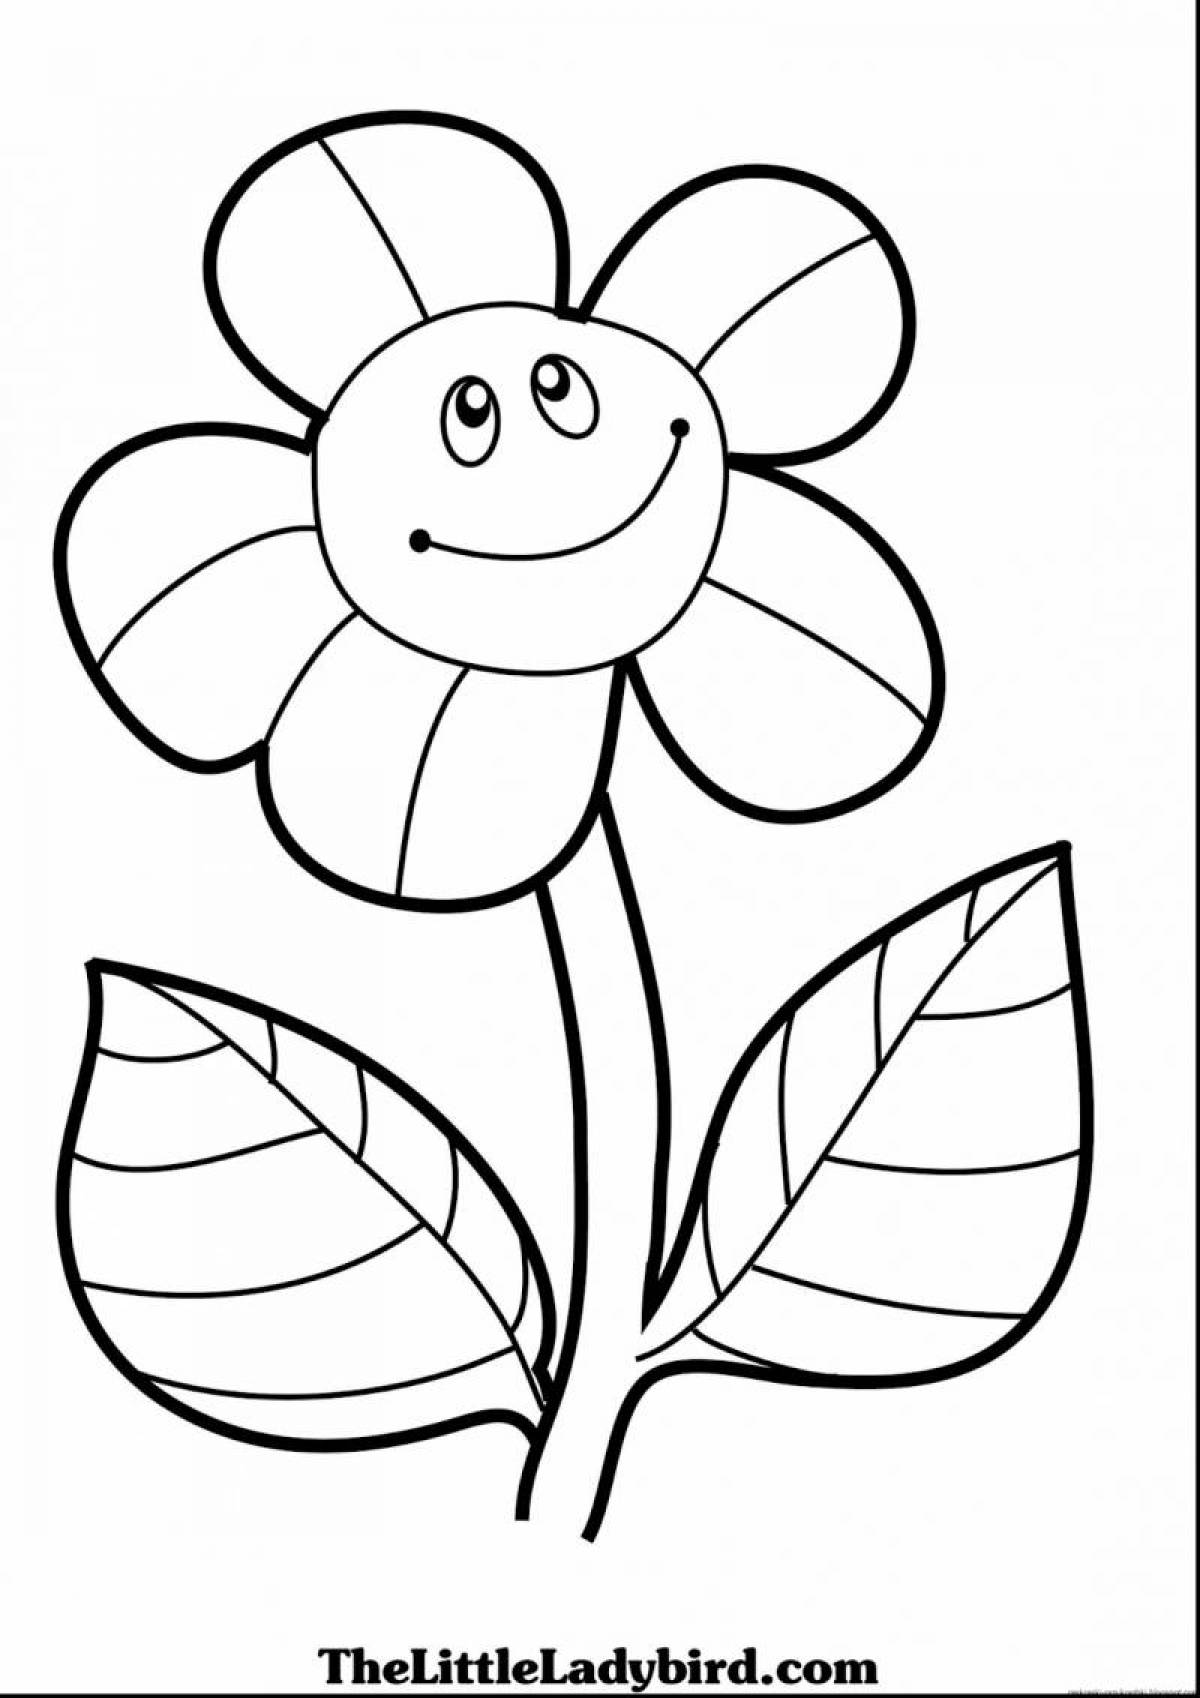 Great flower coloring book for 3-4 year olds